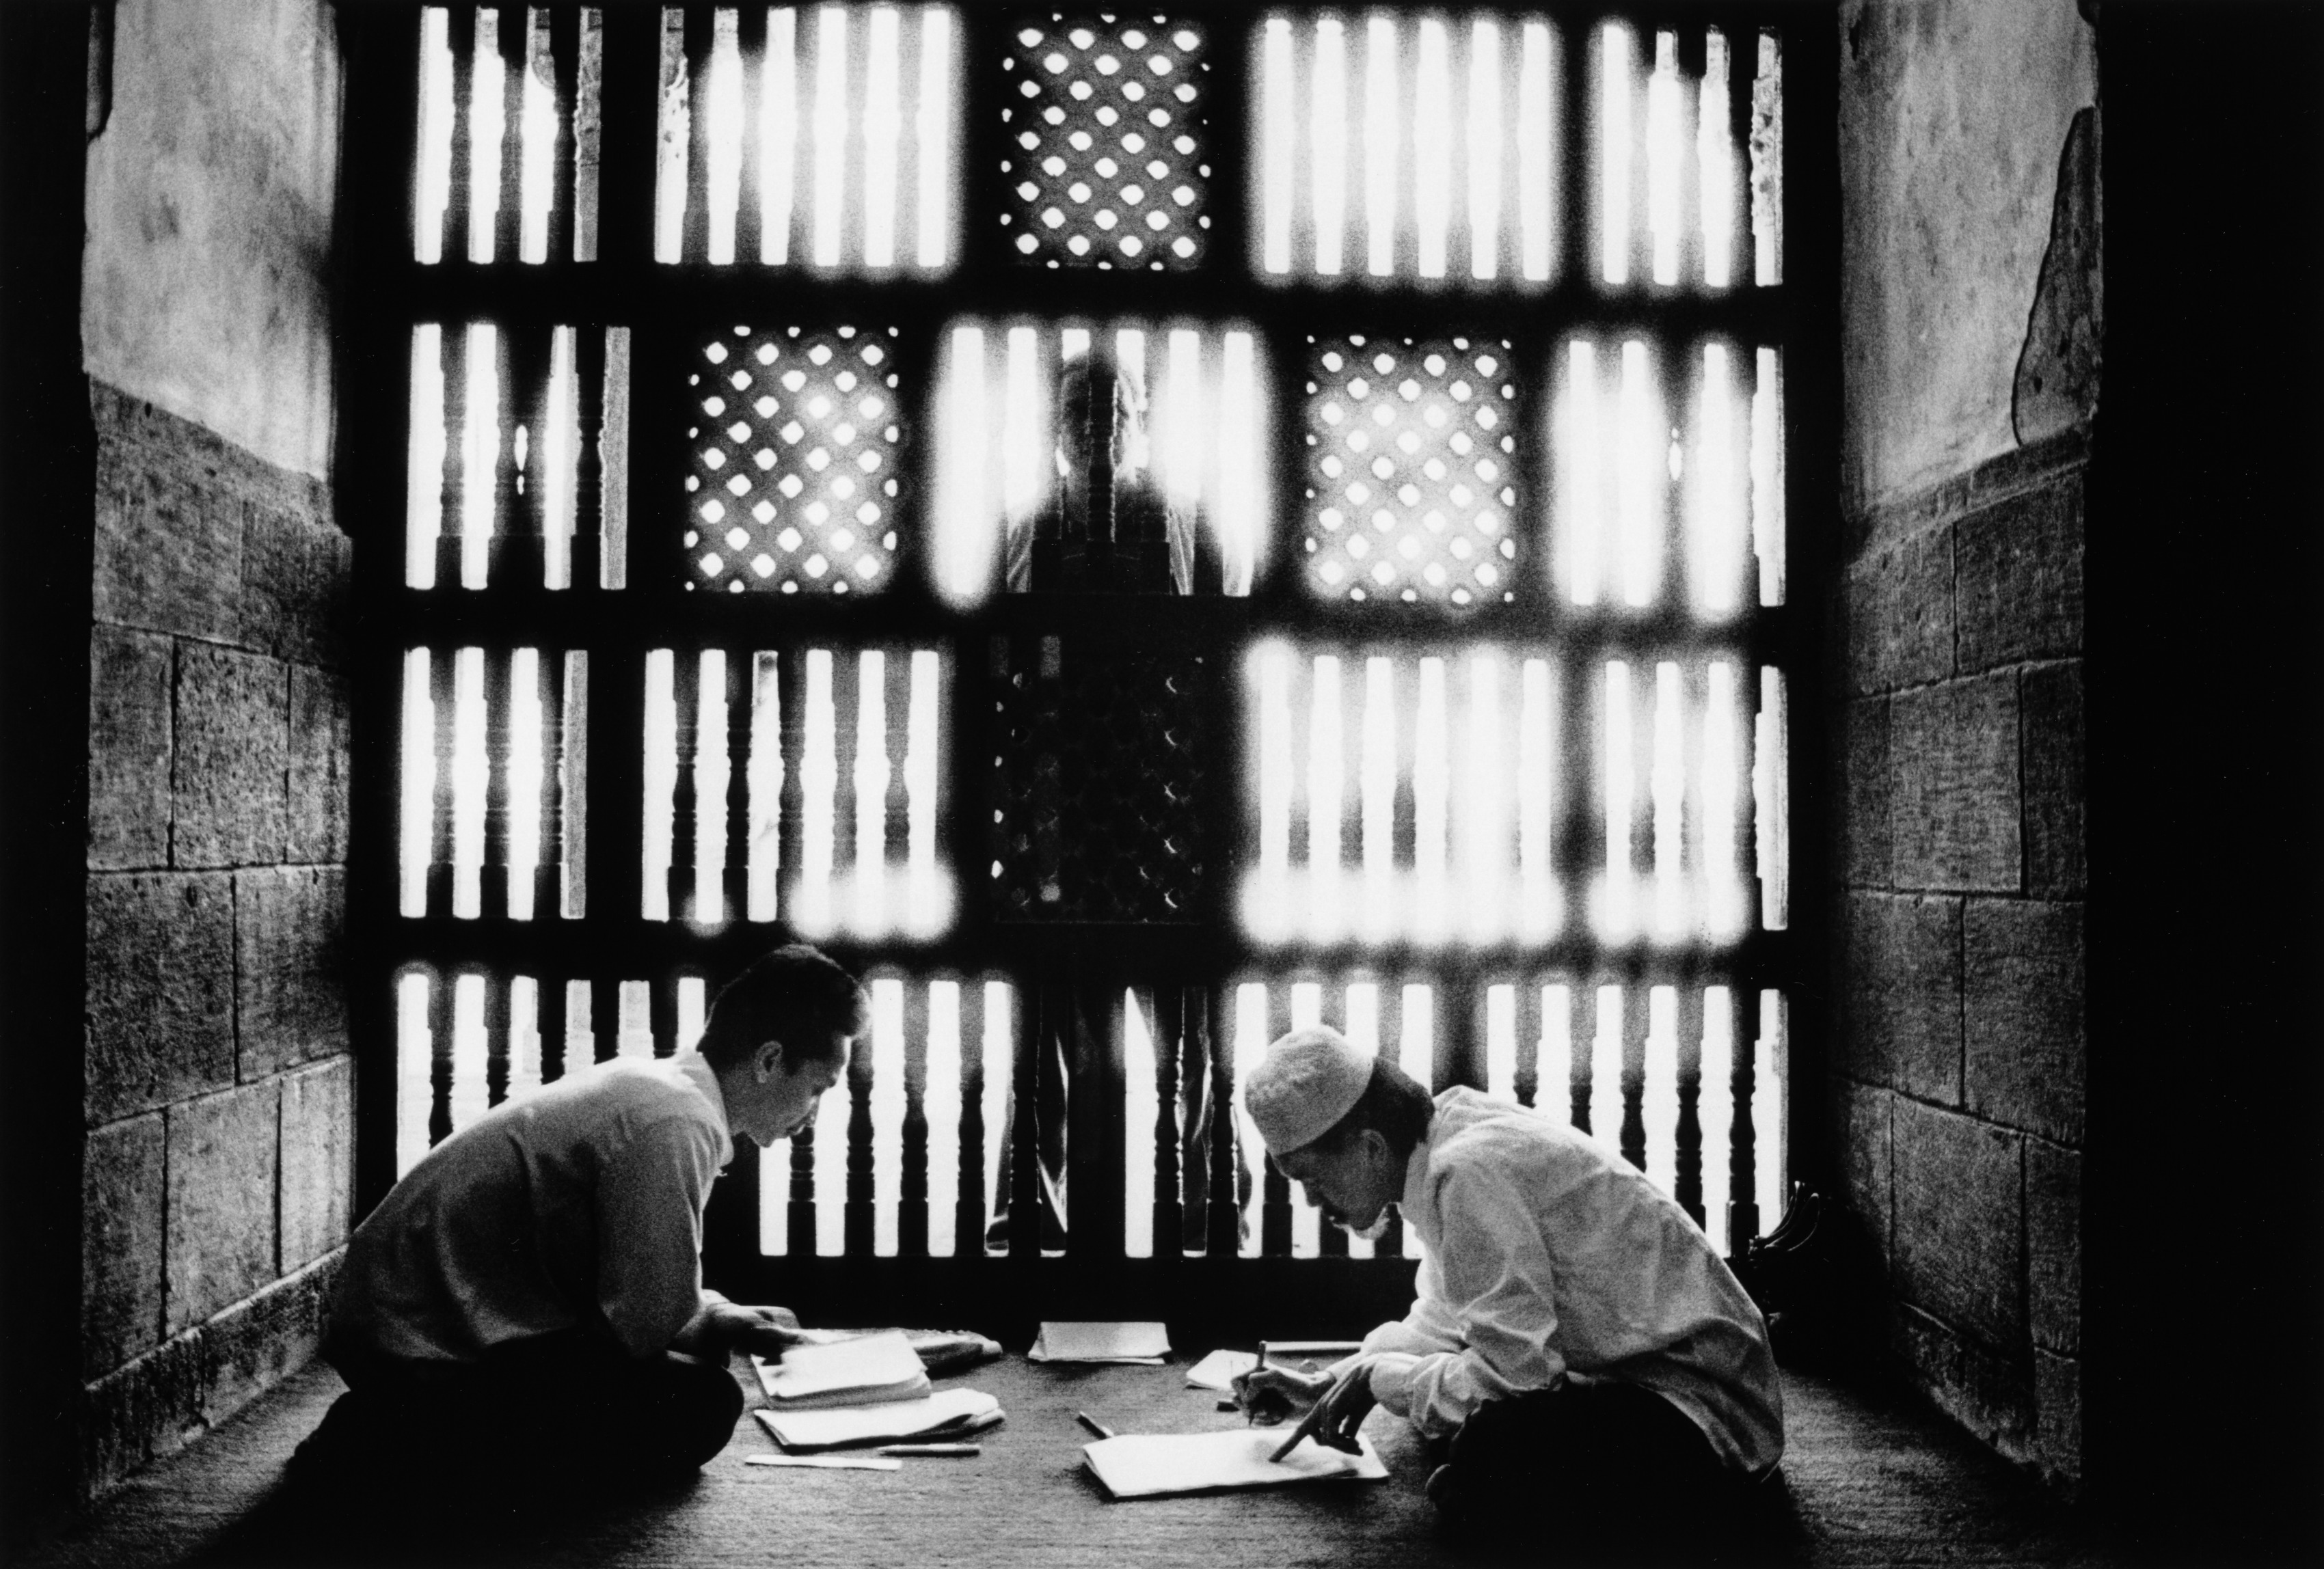 Indonesian students of Islamic theology at the Al-Azhar mosque in Cairo, Egypt